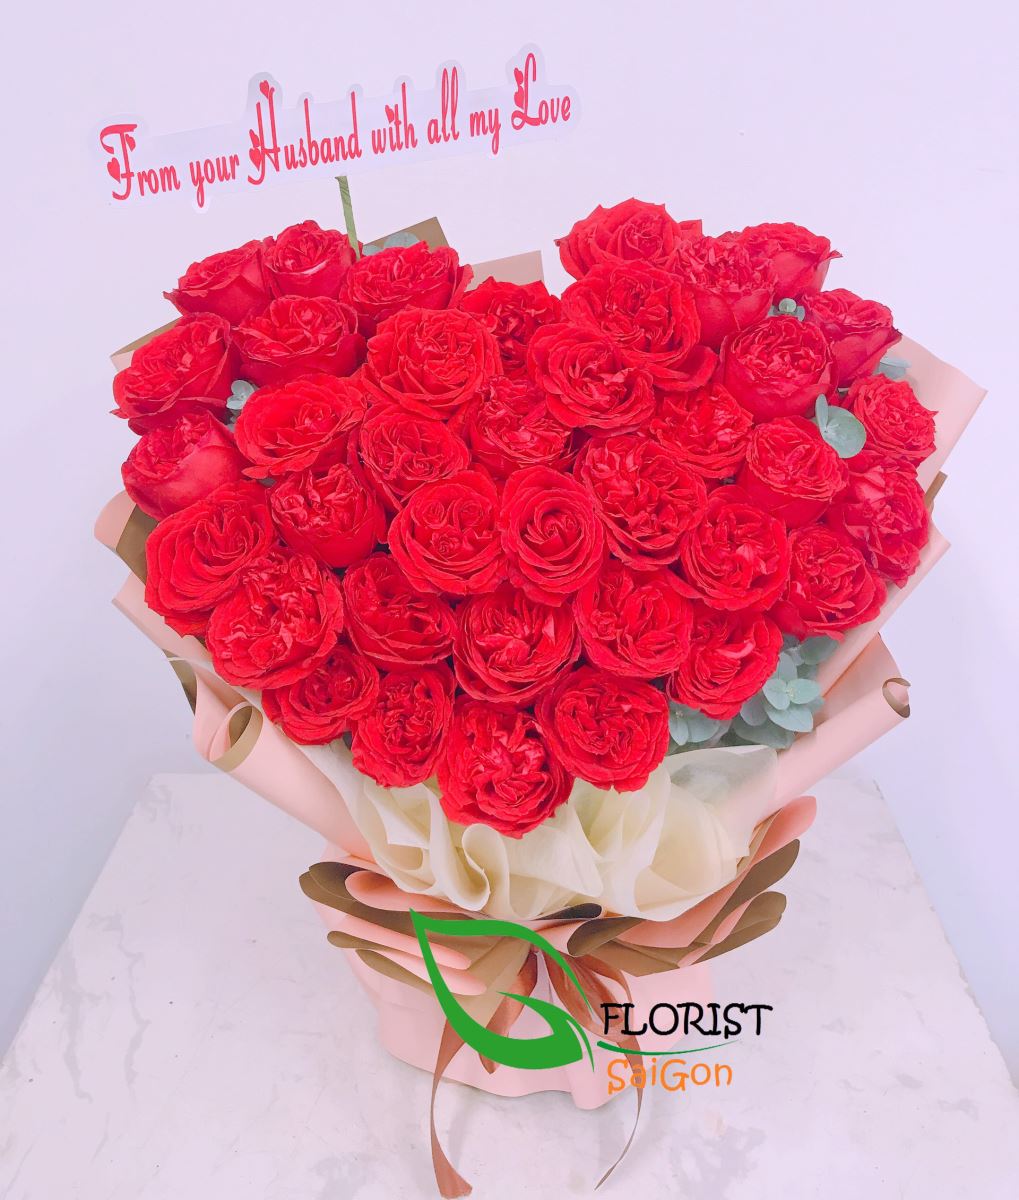 Rose heart to express your love to special someone